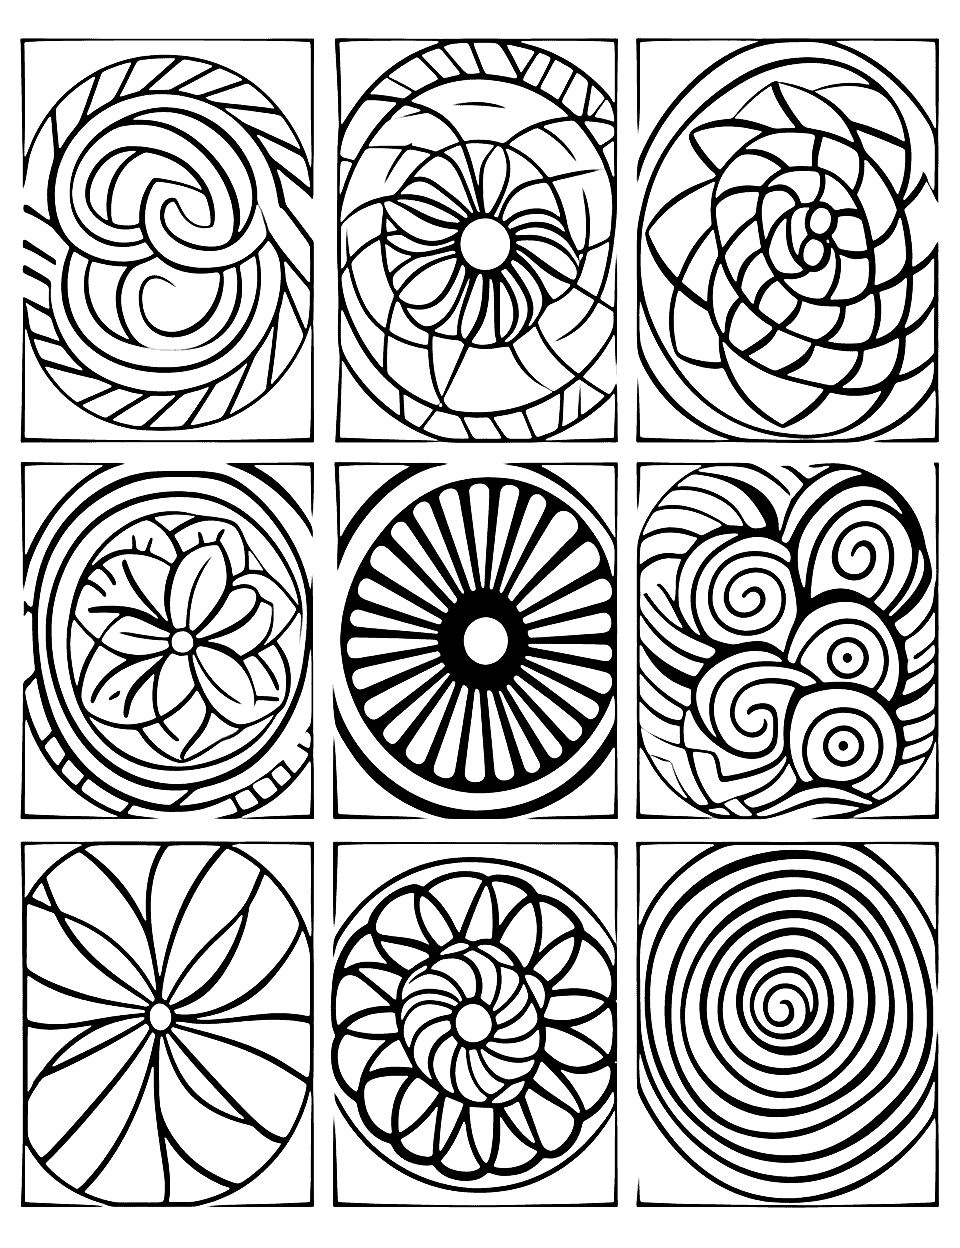 Abstract Patterns Adult Coloring Page - Abstract patterns featuring geometric shapes and spirals.